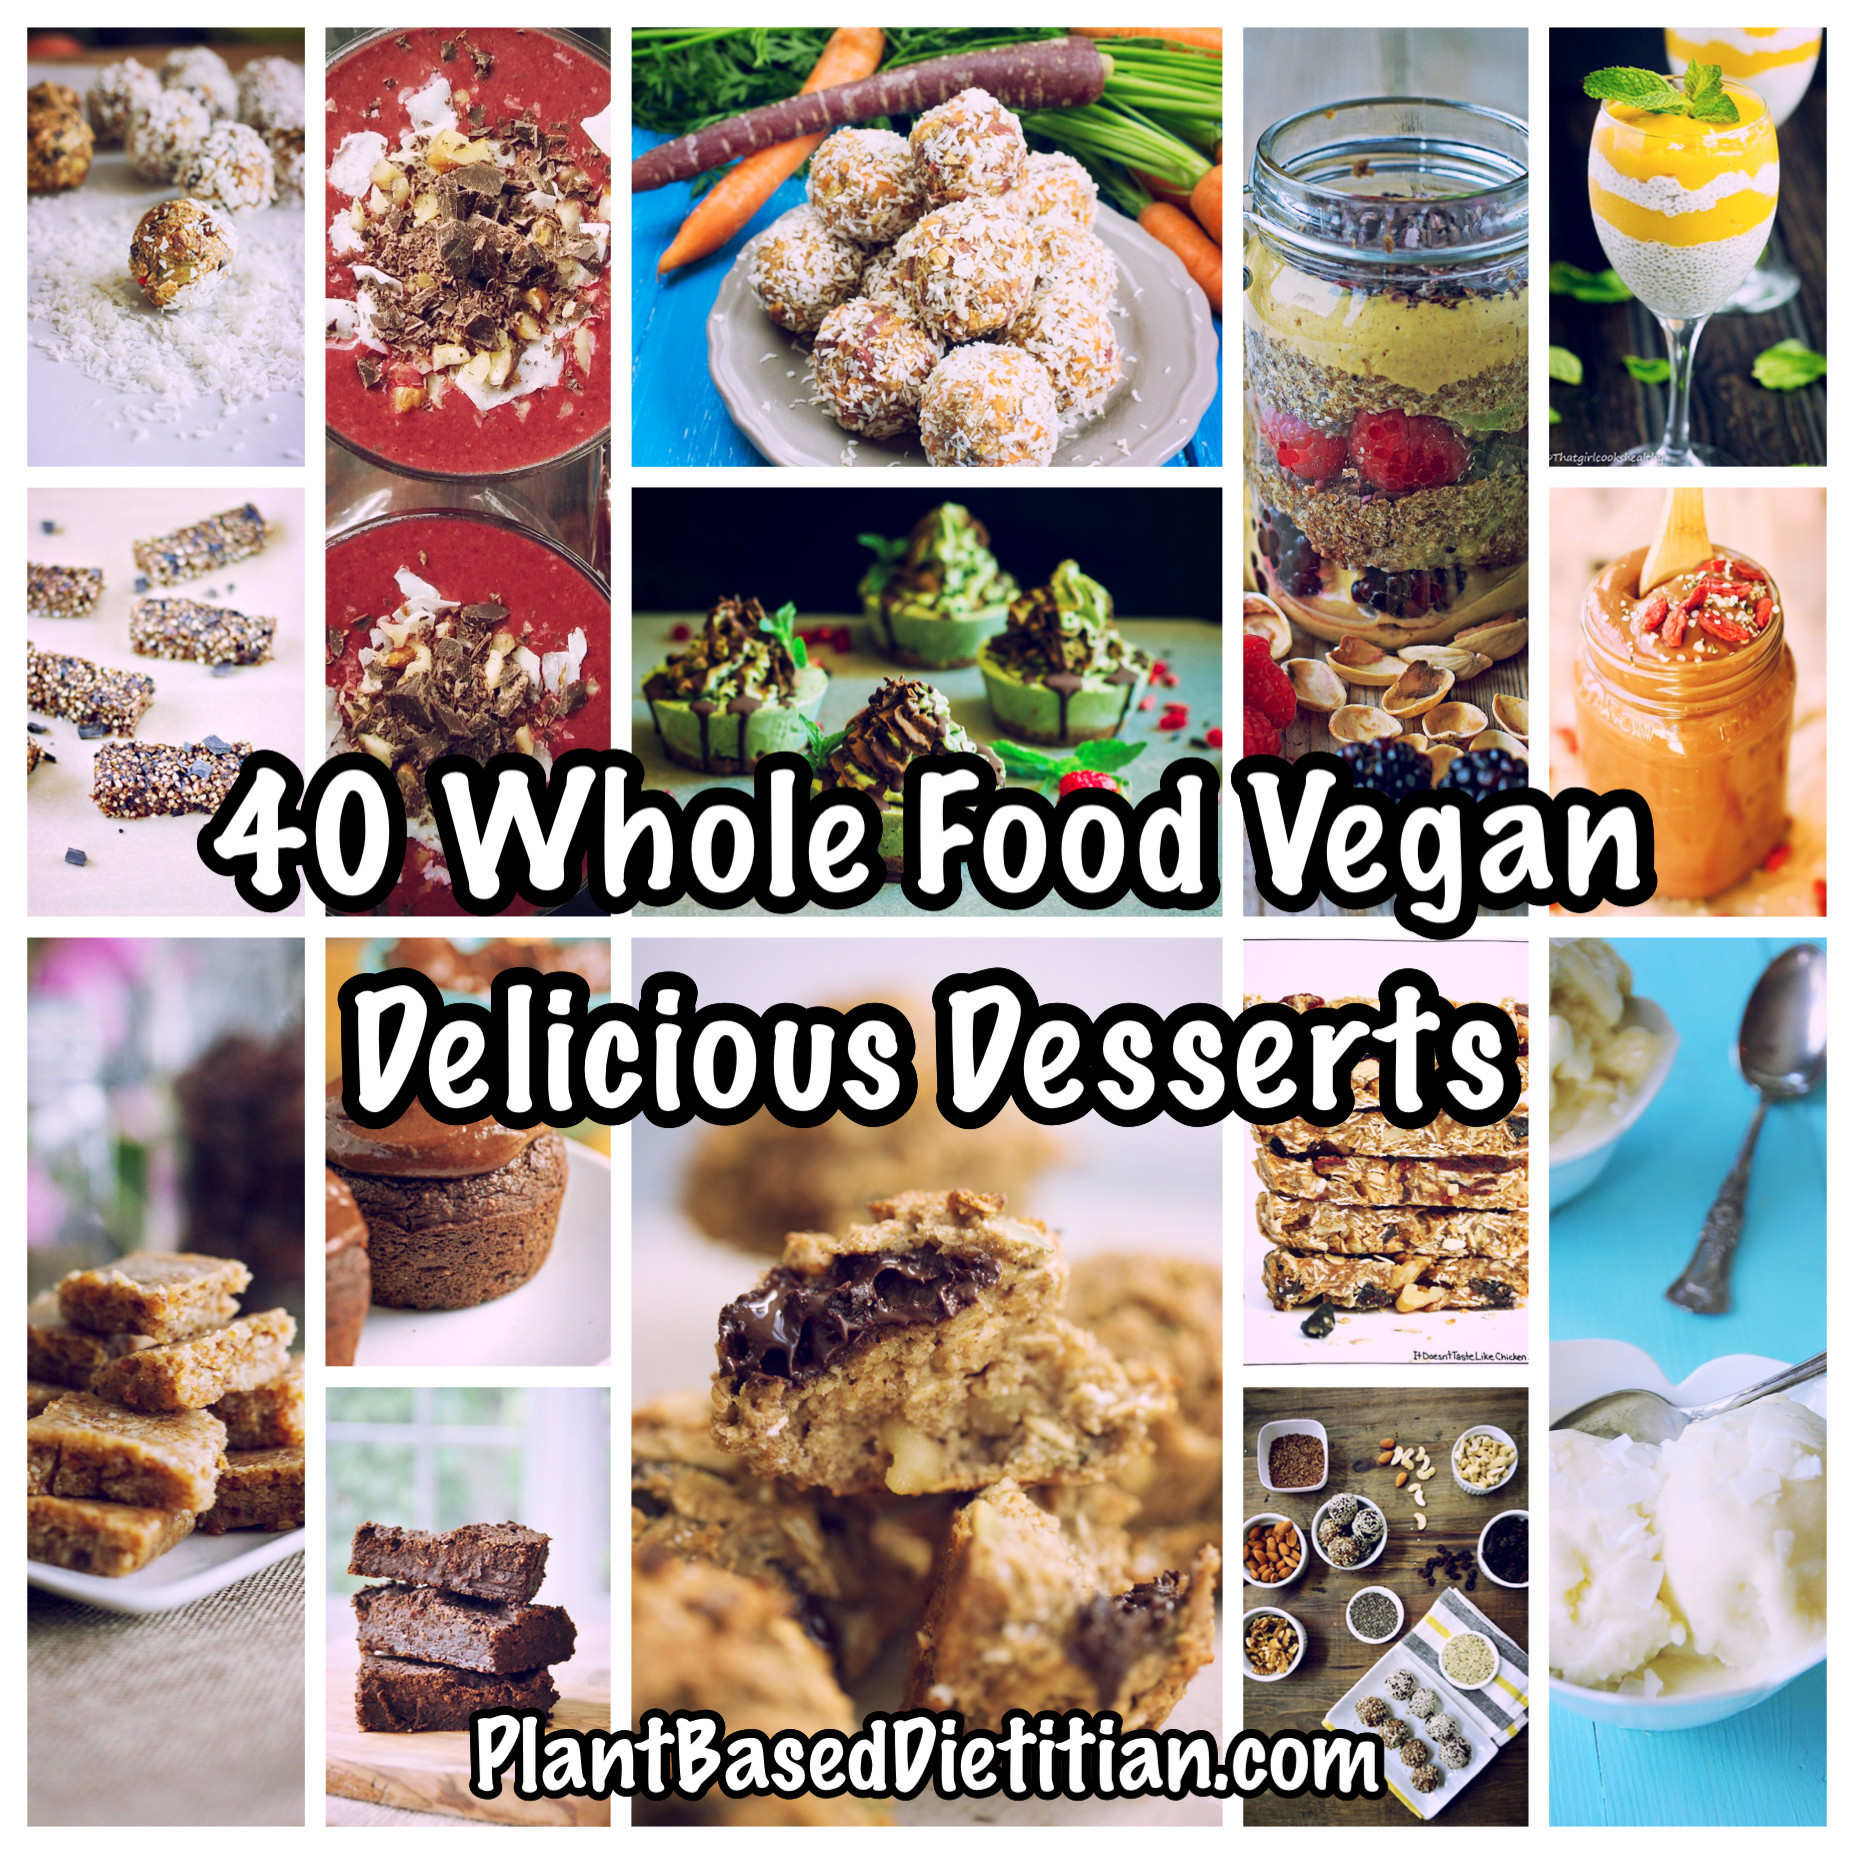 Vegan Desserts At Whole Foods
 40 Whole Food Vegan Delicious Desserts Plant Based Dietitian